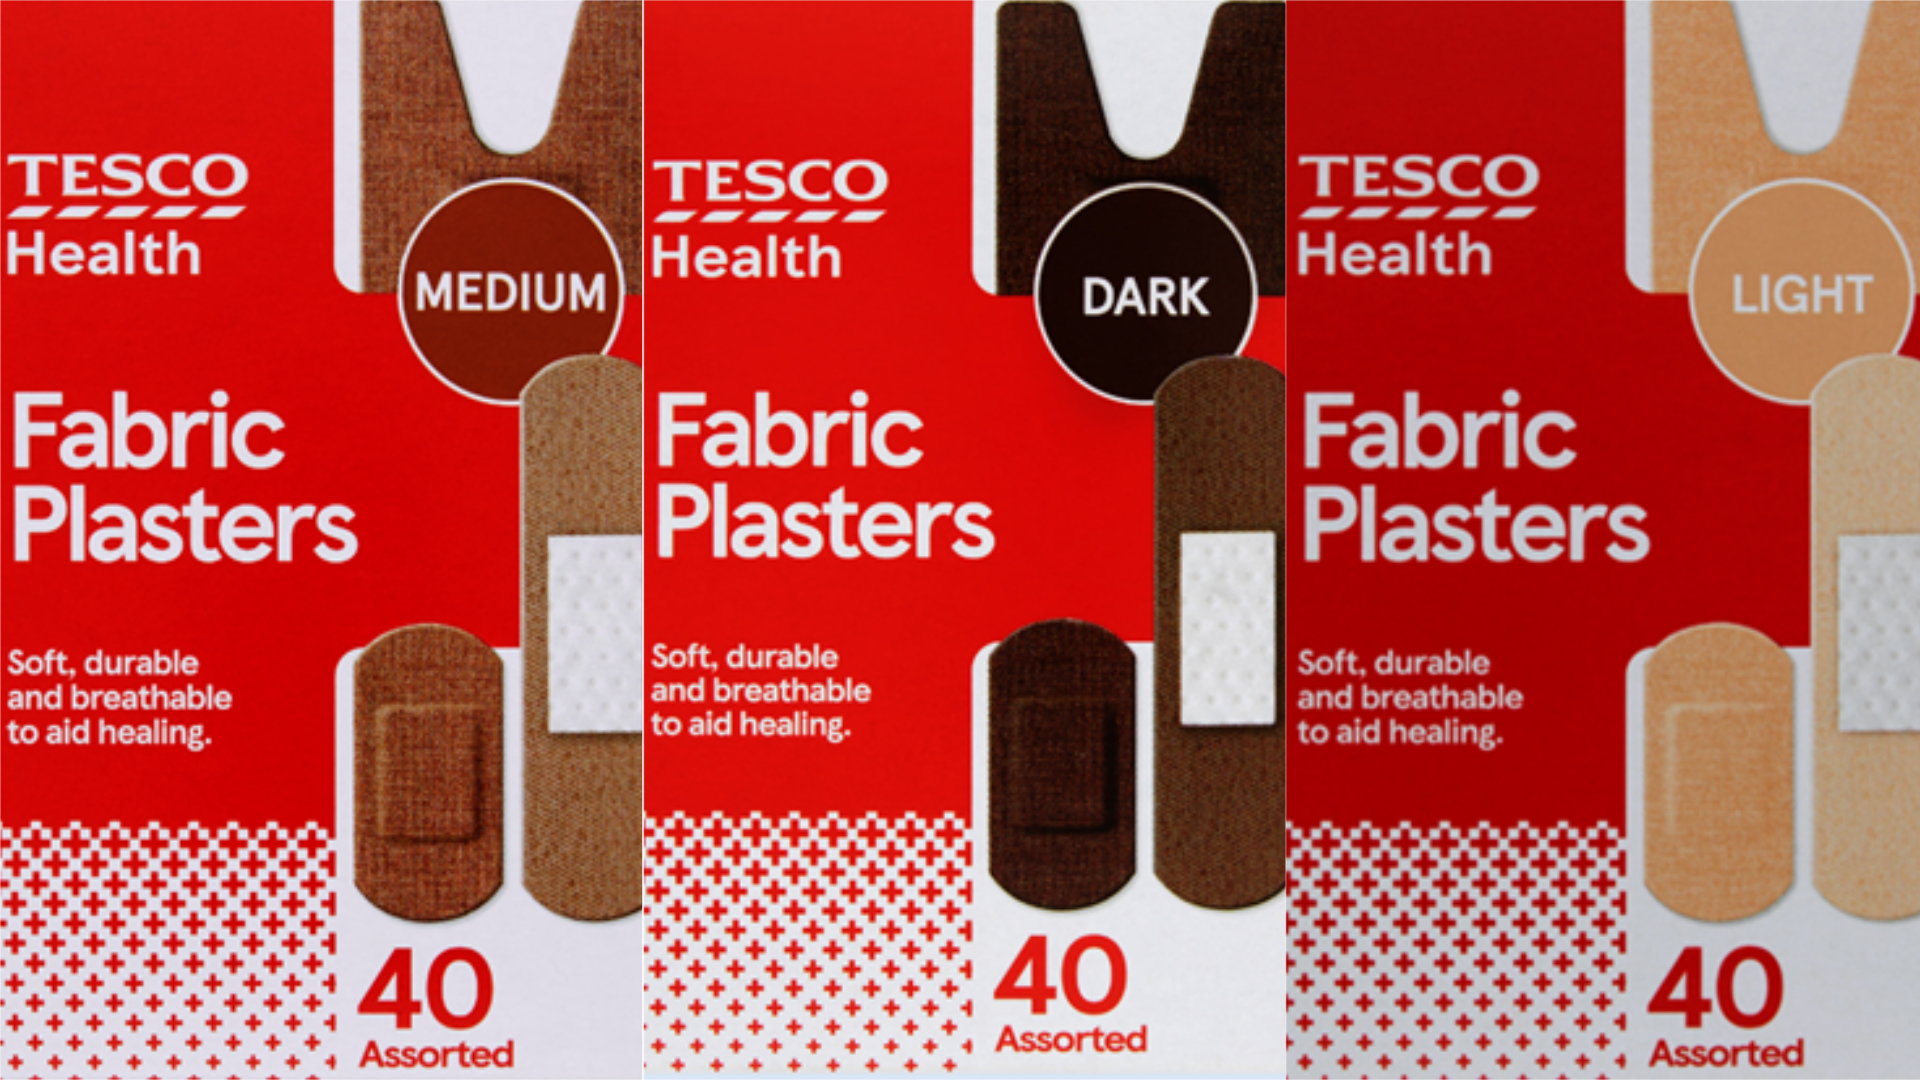 Tesco launches diverse range of plasters